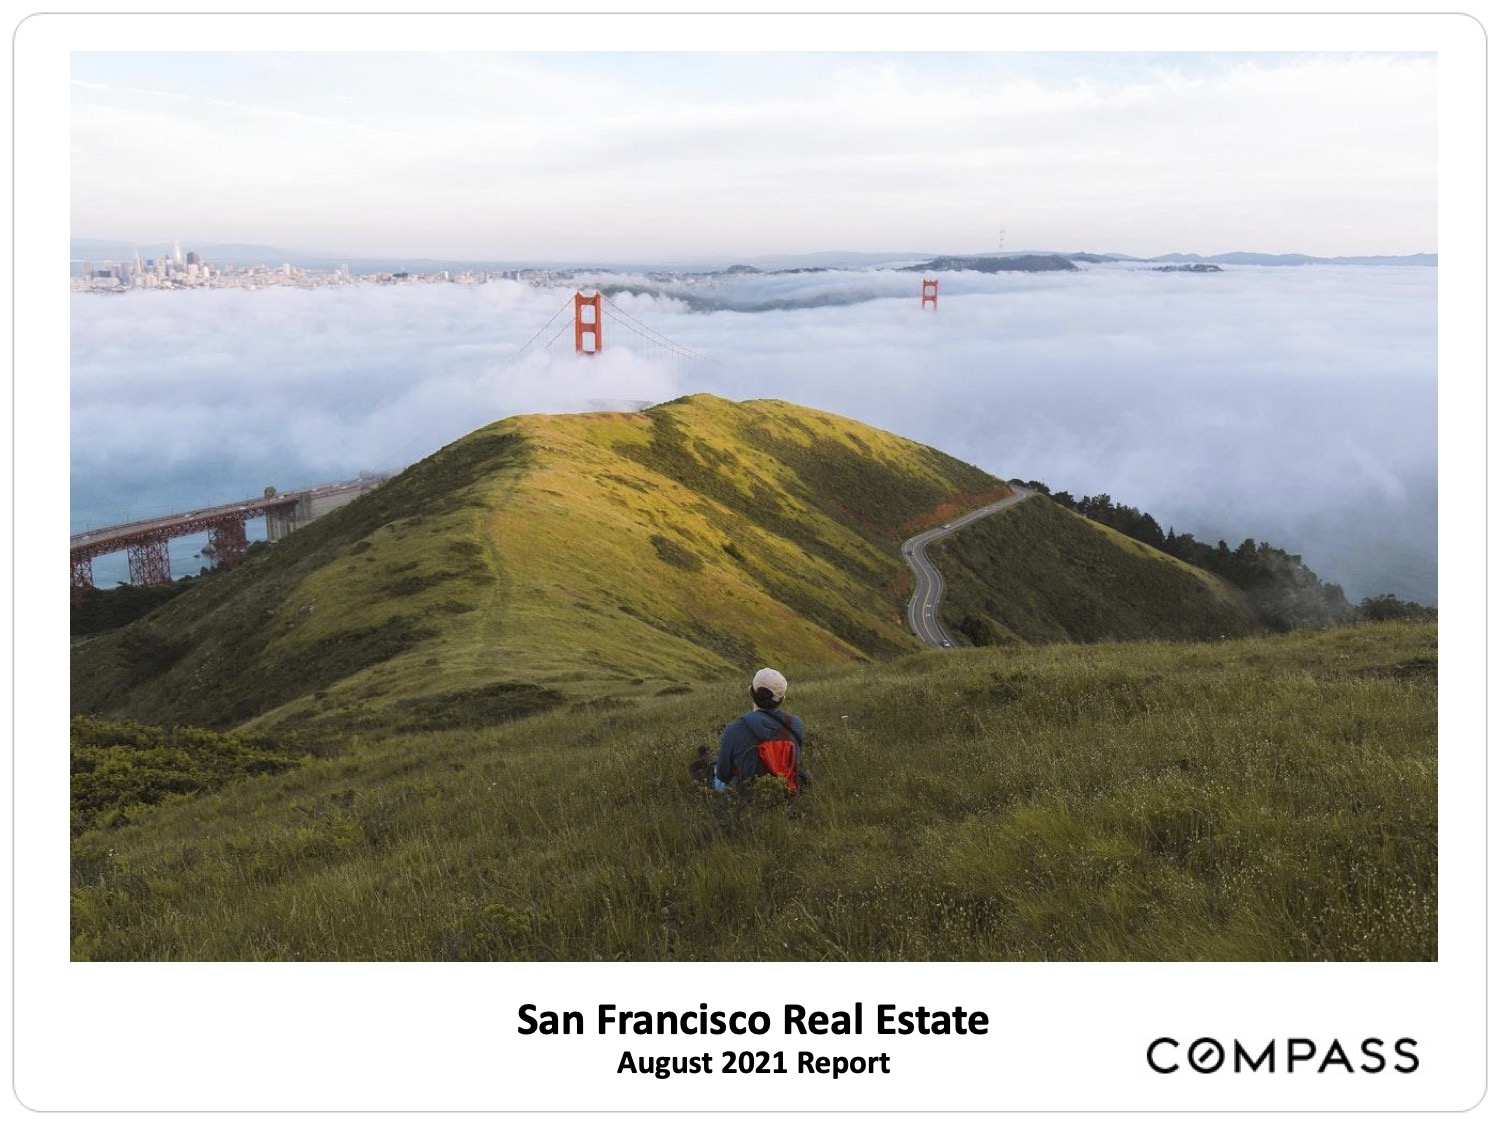 Image Cover of San Francisco Real Estate August 2021 Report